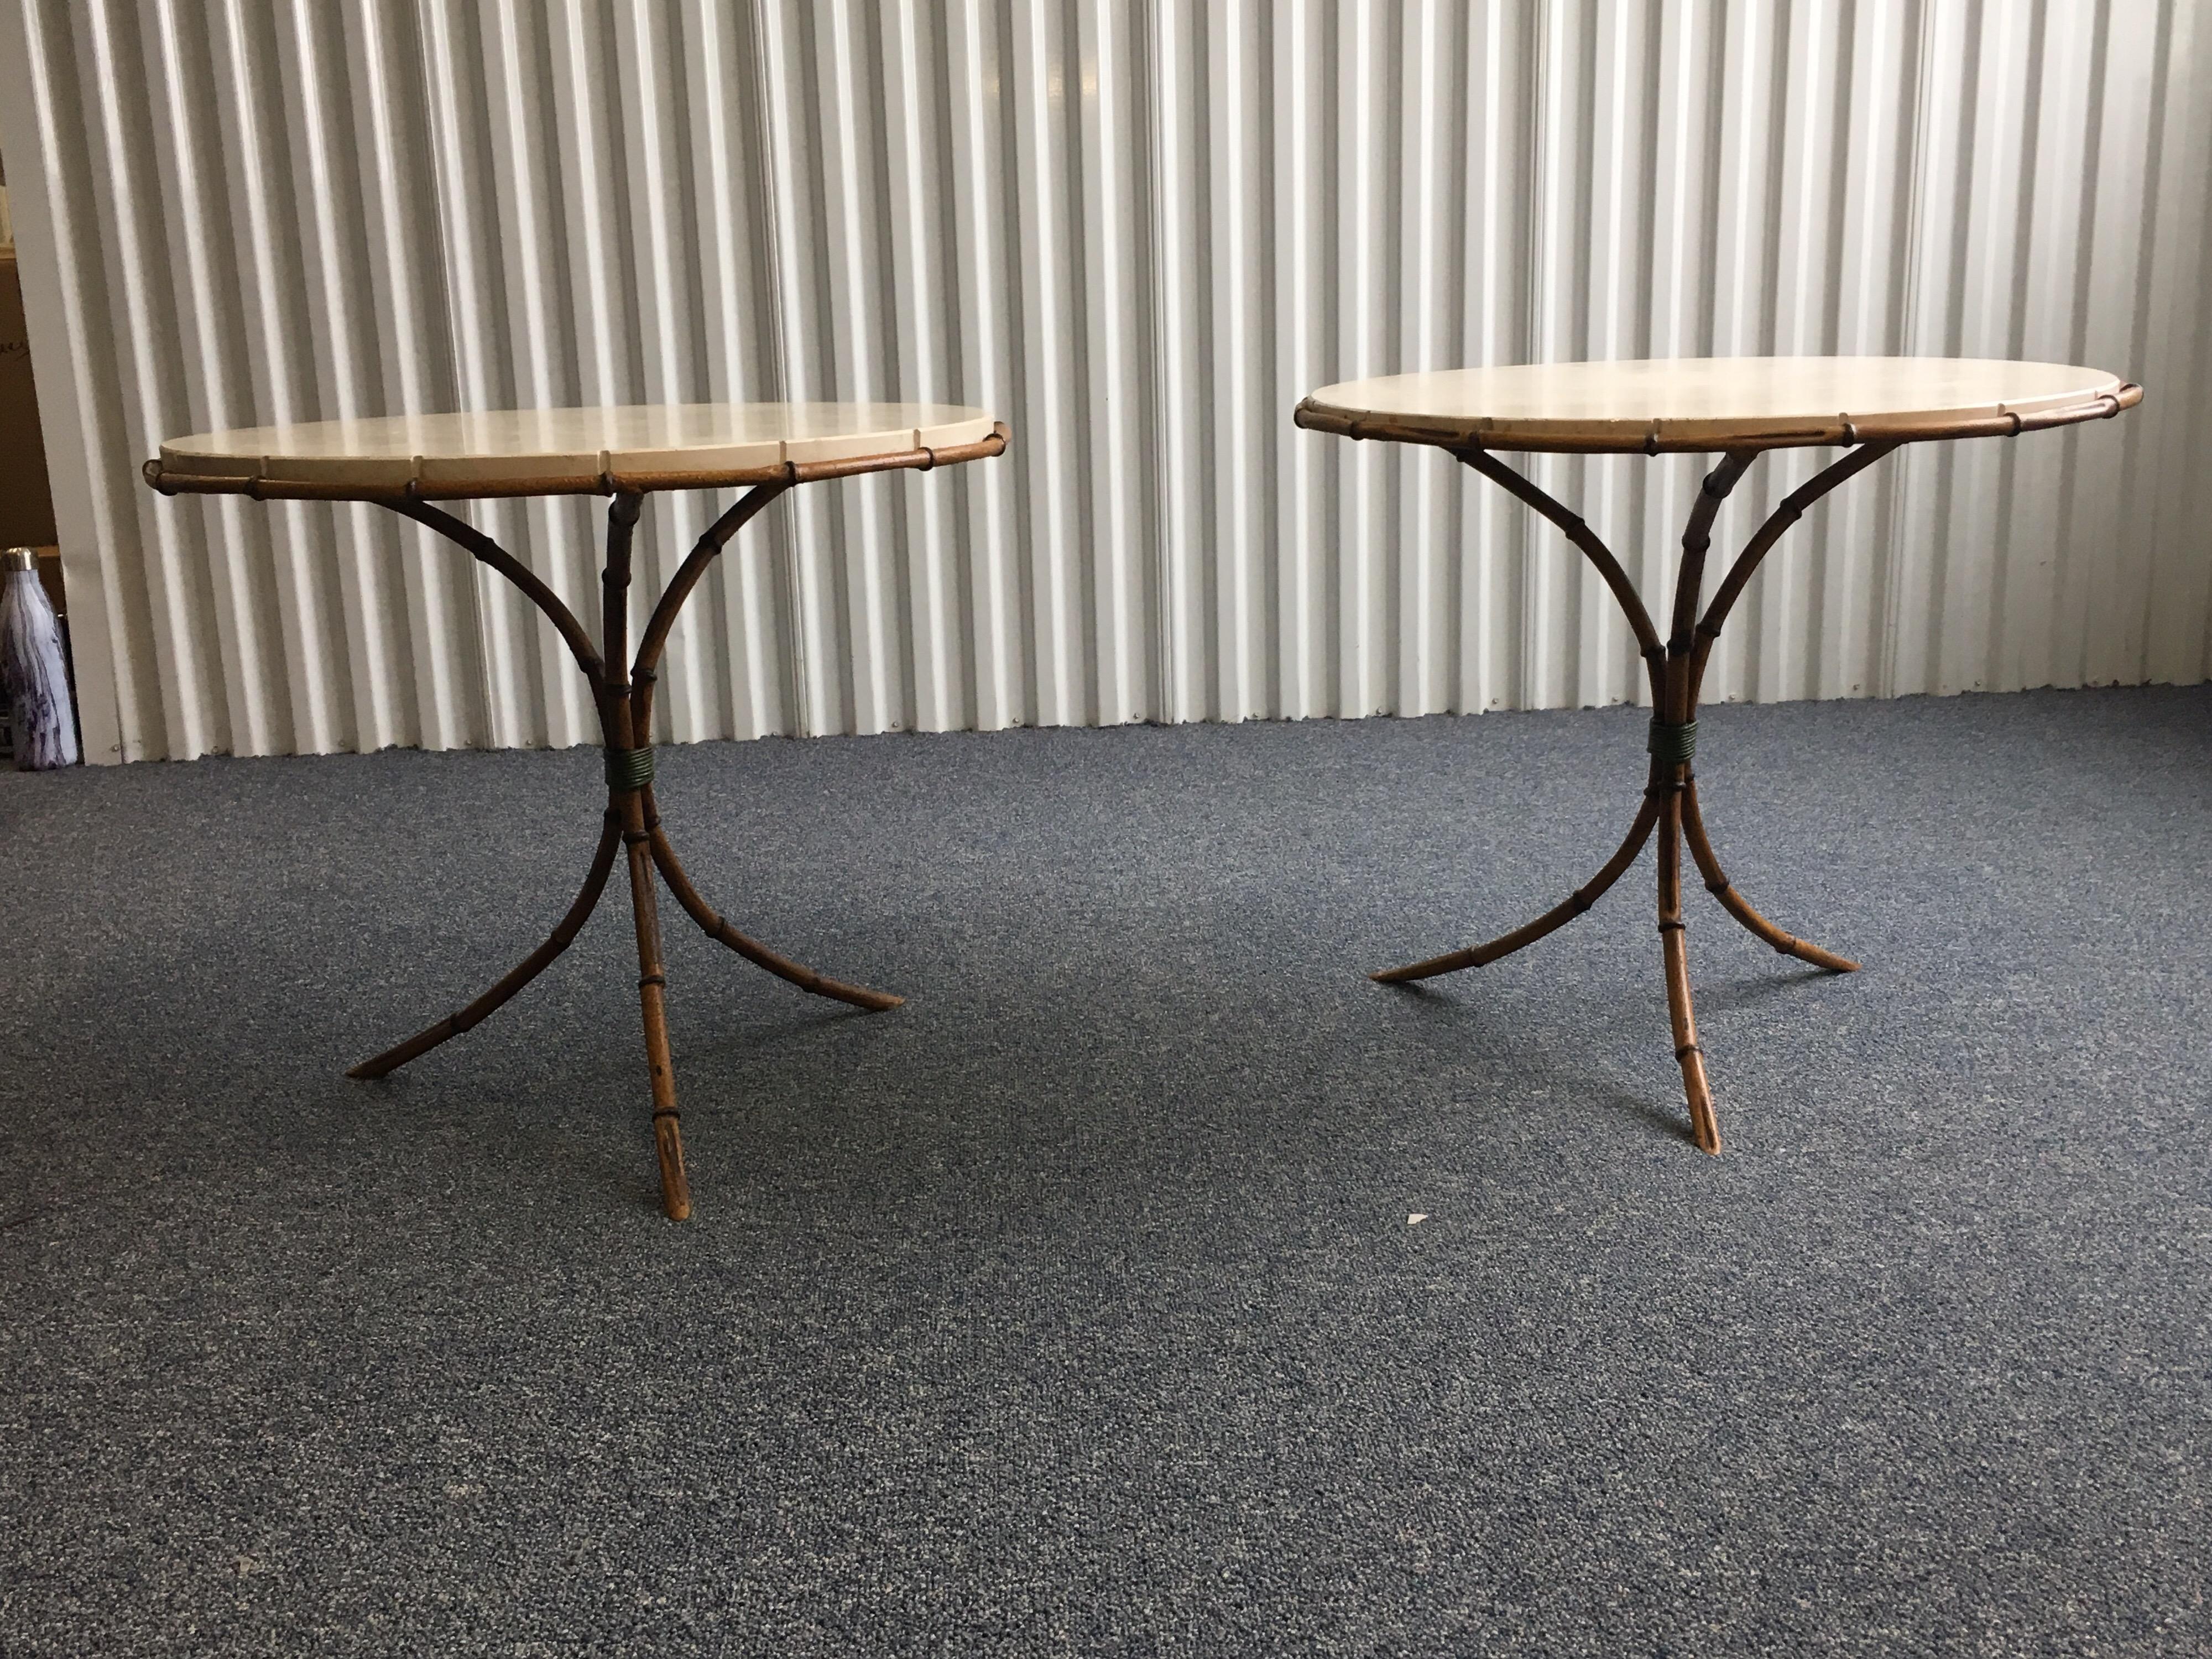 Pair of travertine top bamboo tripod base side tables. Round travertine tops drop into base. Lovely reeding detail in travertine top at each bamboo notch. Bamboo Tripod bases. Minor chip to one travertine top. Great condition otherwise. Great